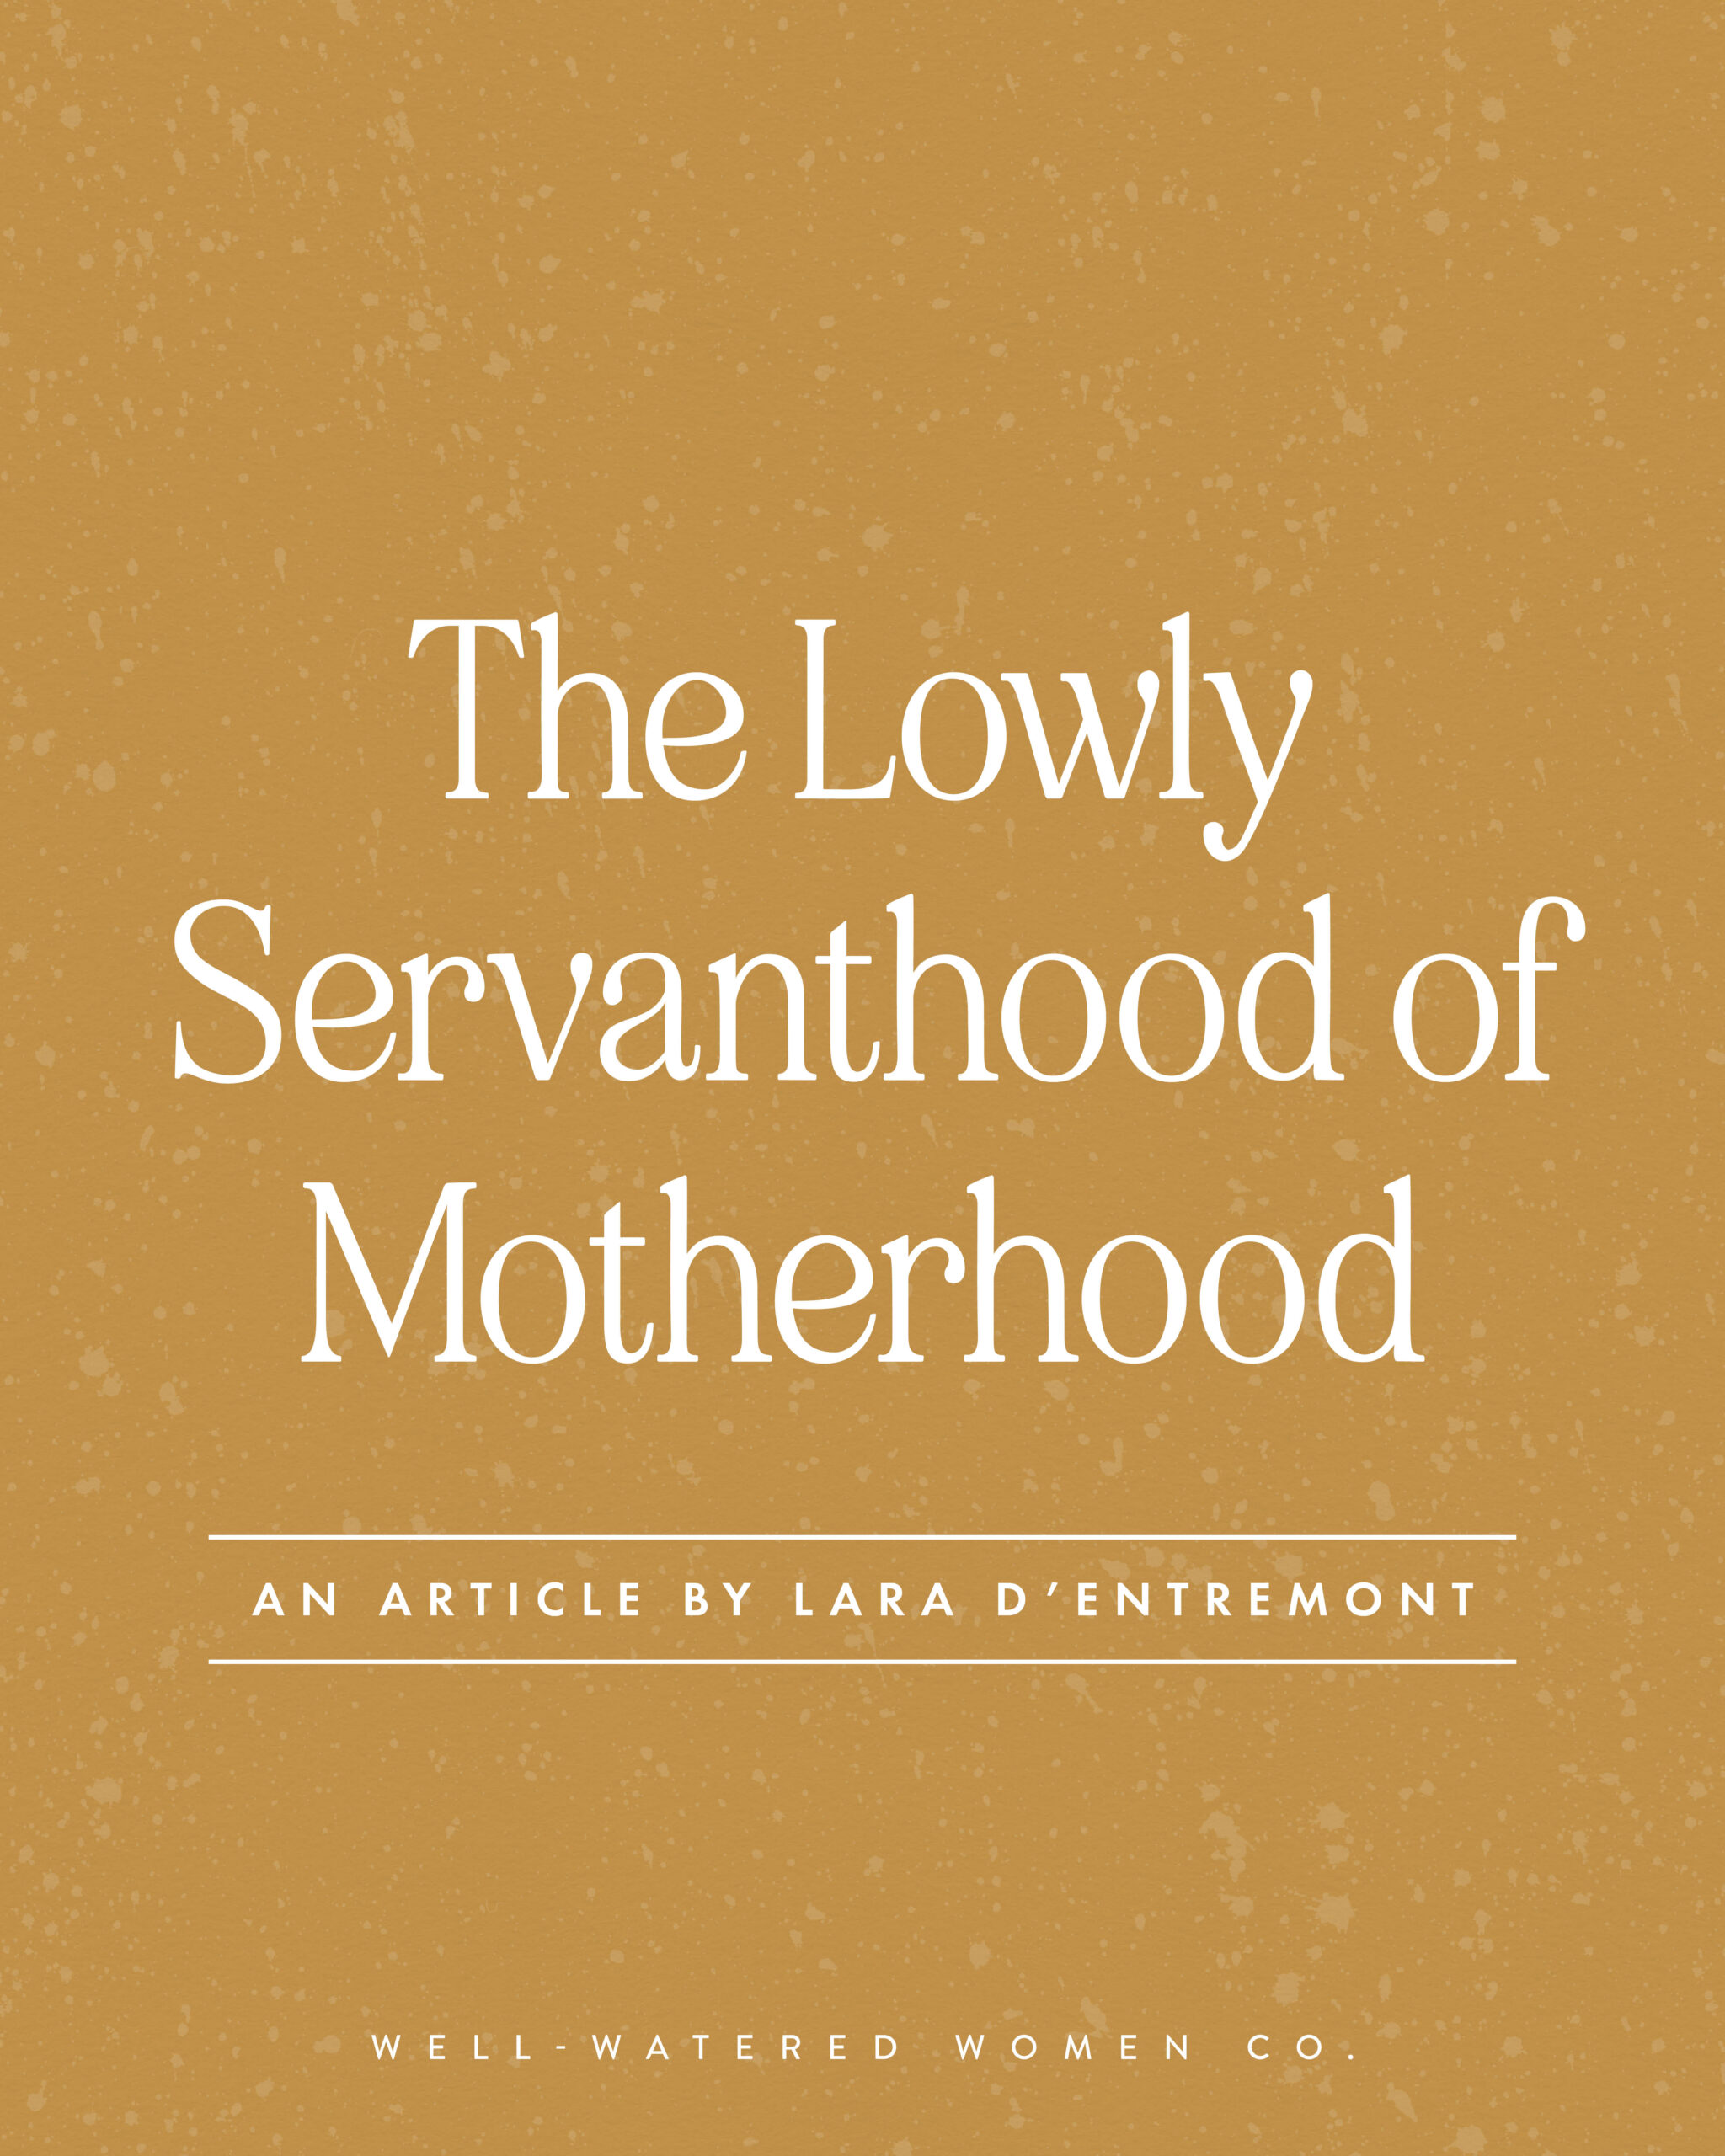 The Lowly Servanthood of Motherhood - an article from Well-Watered Women